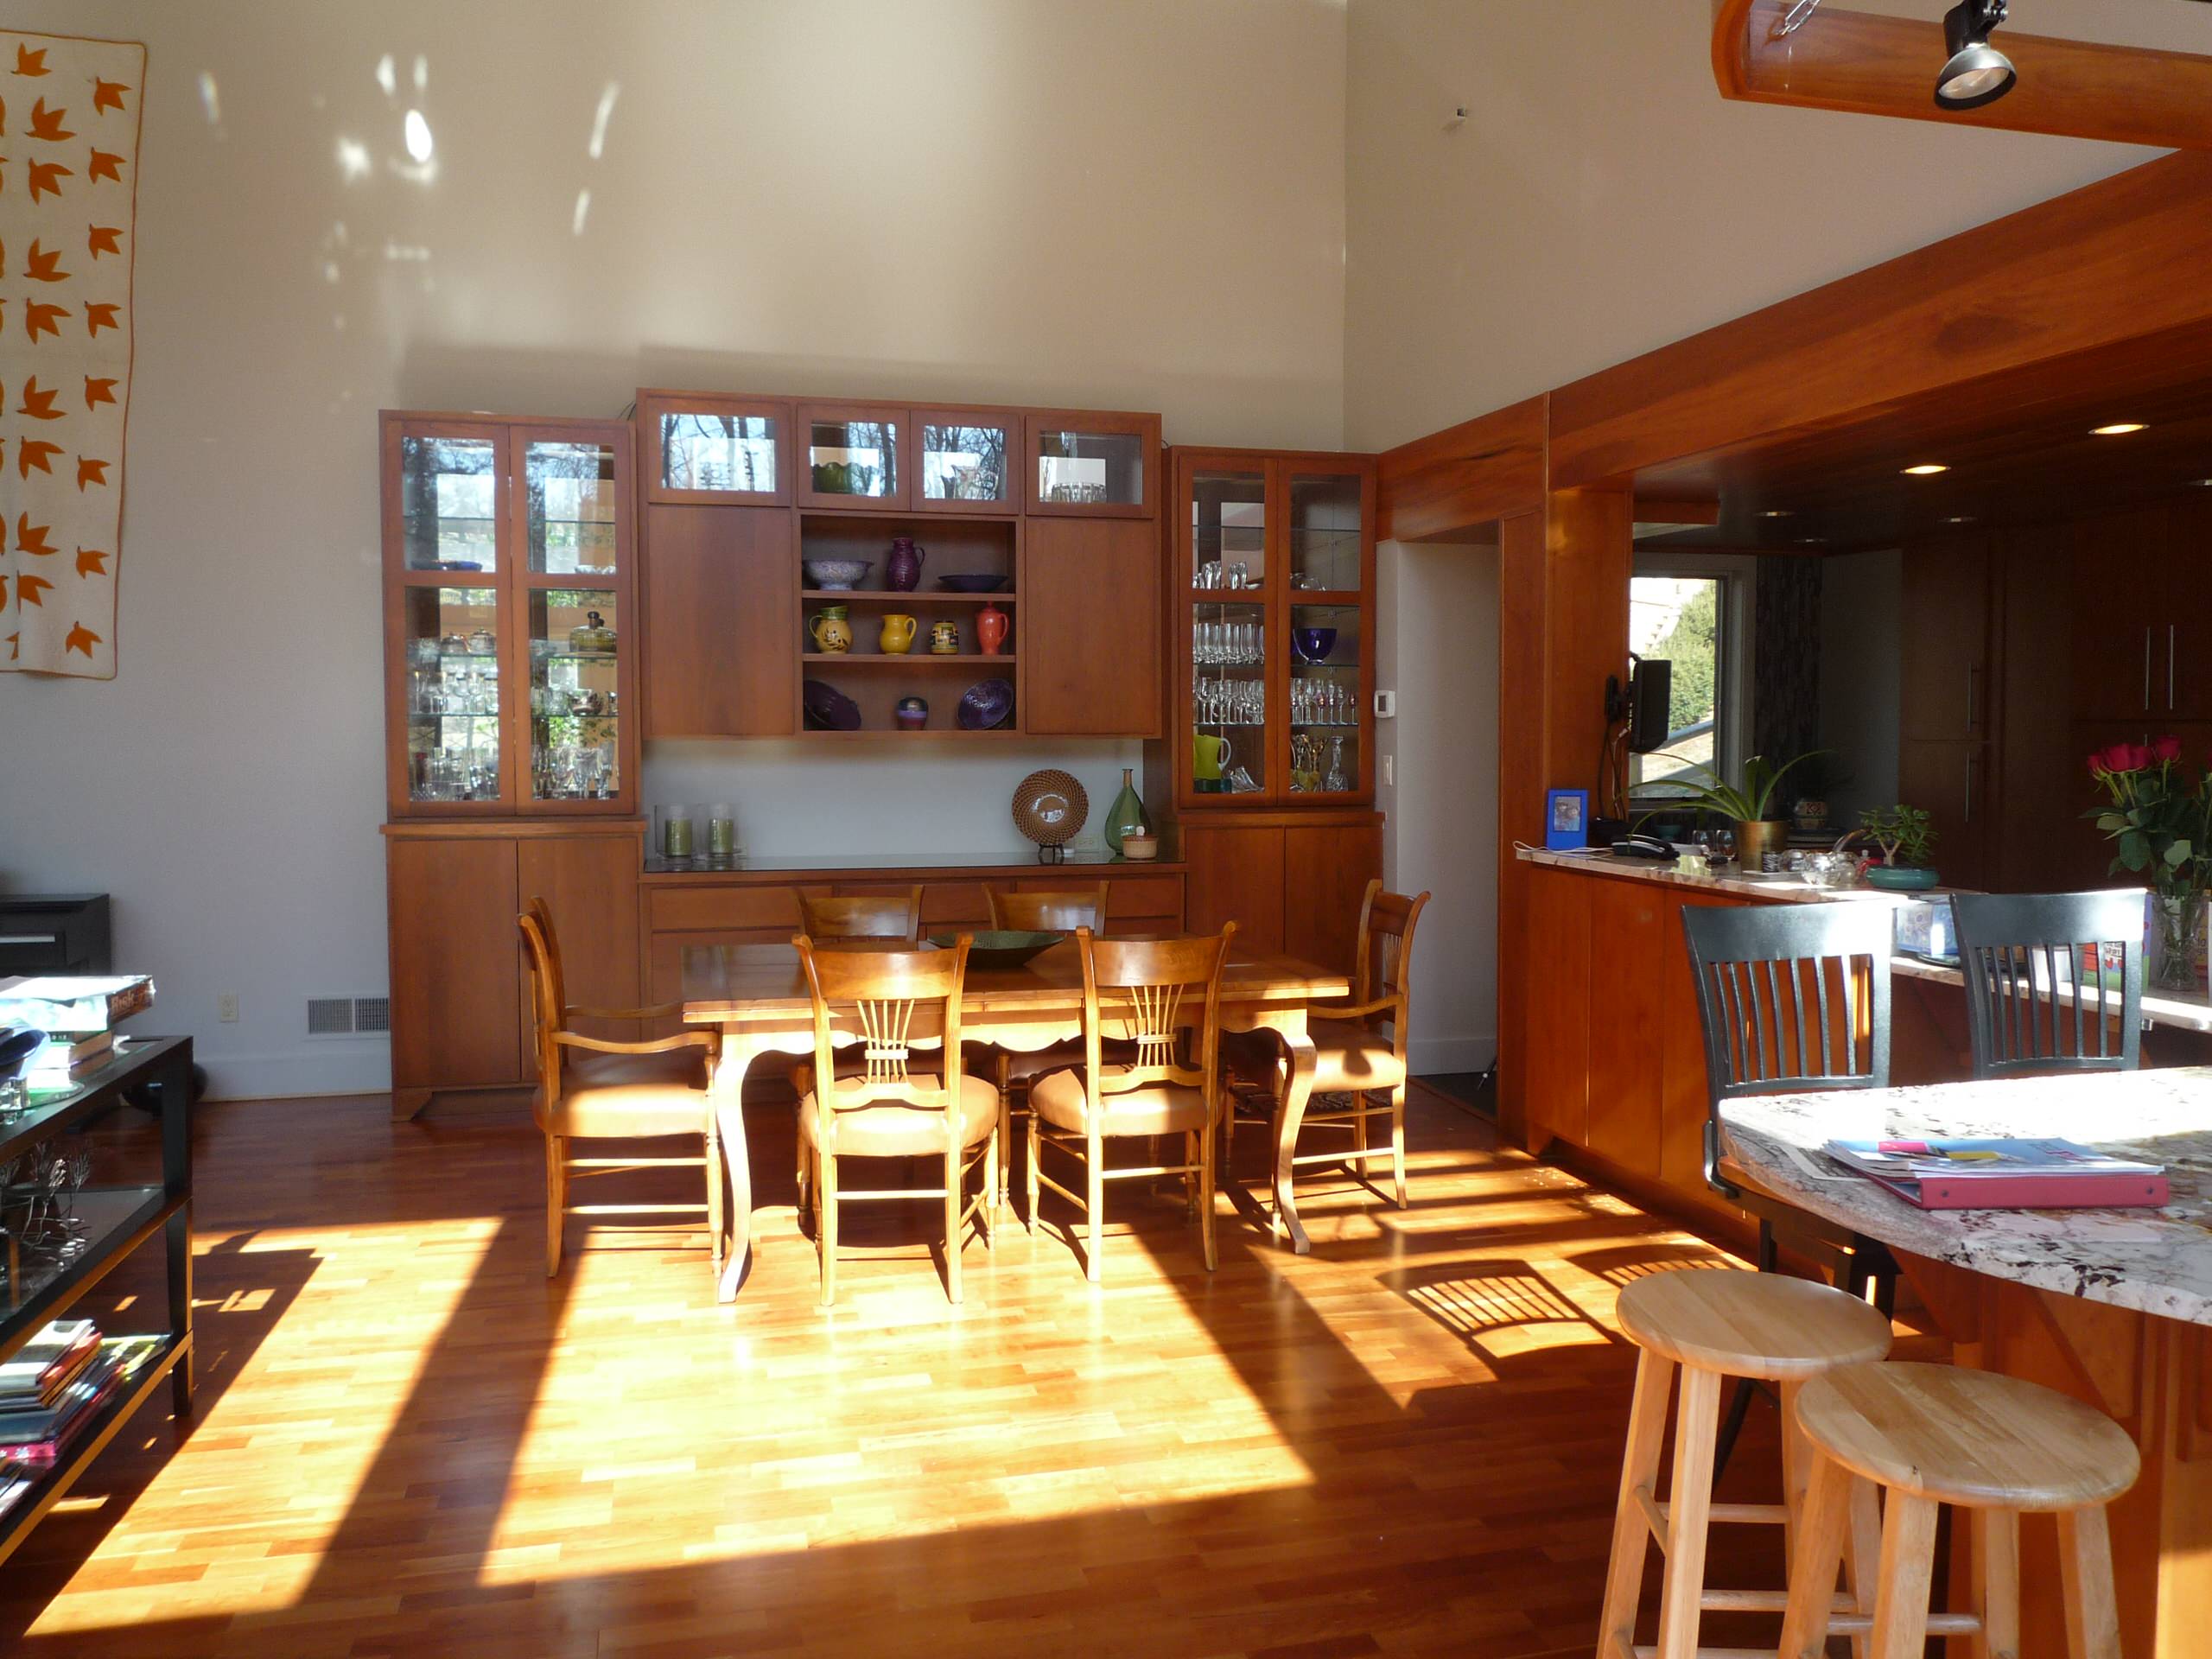 Contemporay, cherry, earthy, paneled ceiling kitchen